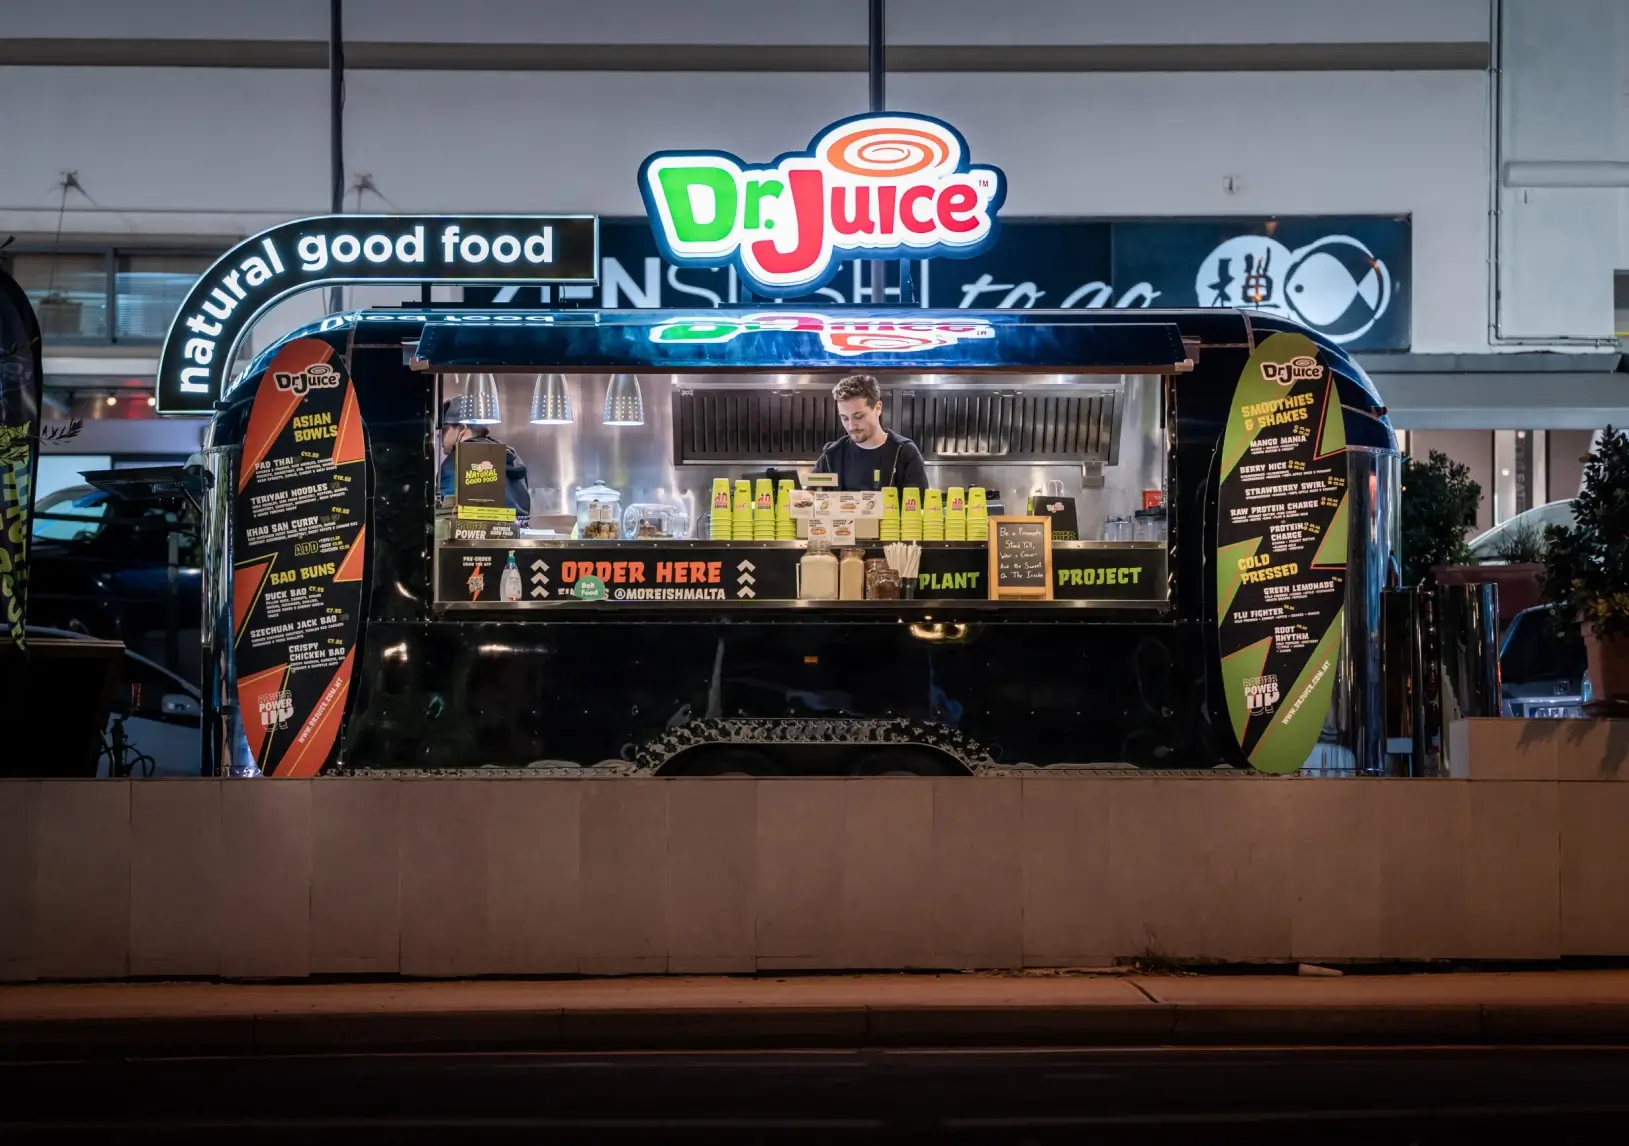 A 43% JUMP IN SALES PER LABOUR HOUR: DR. JUICE’S SUCCESS WITH NORY